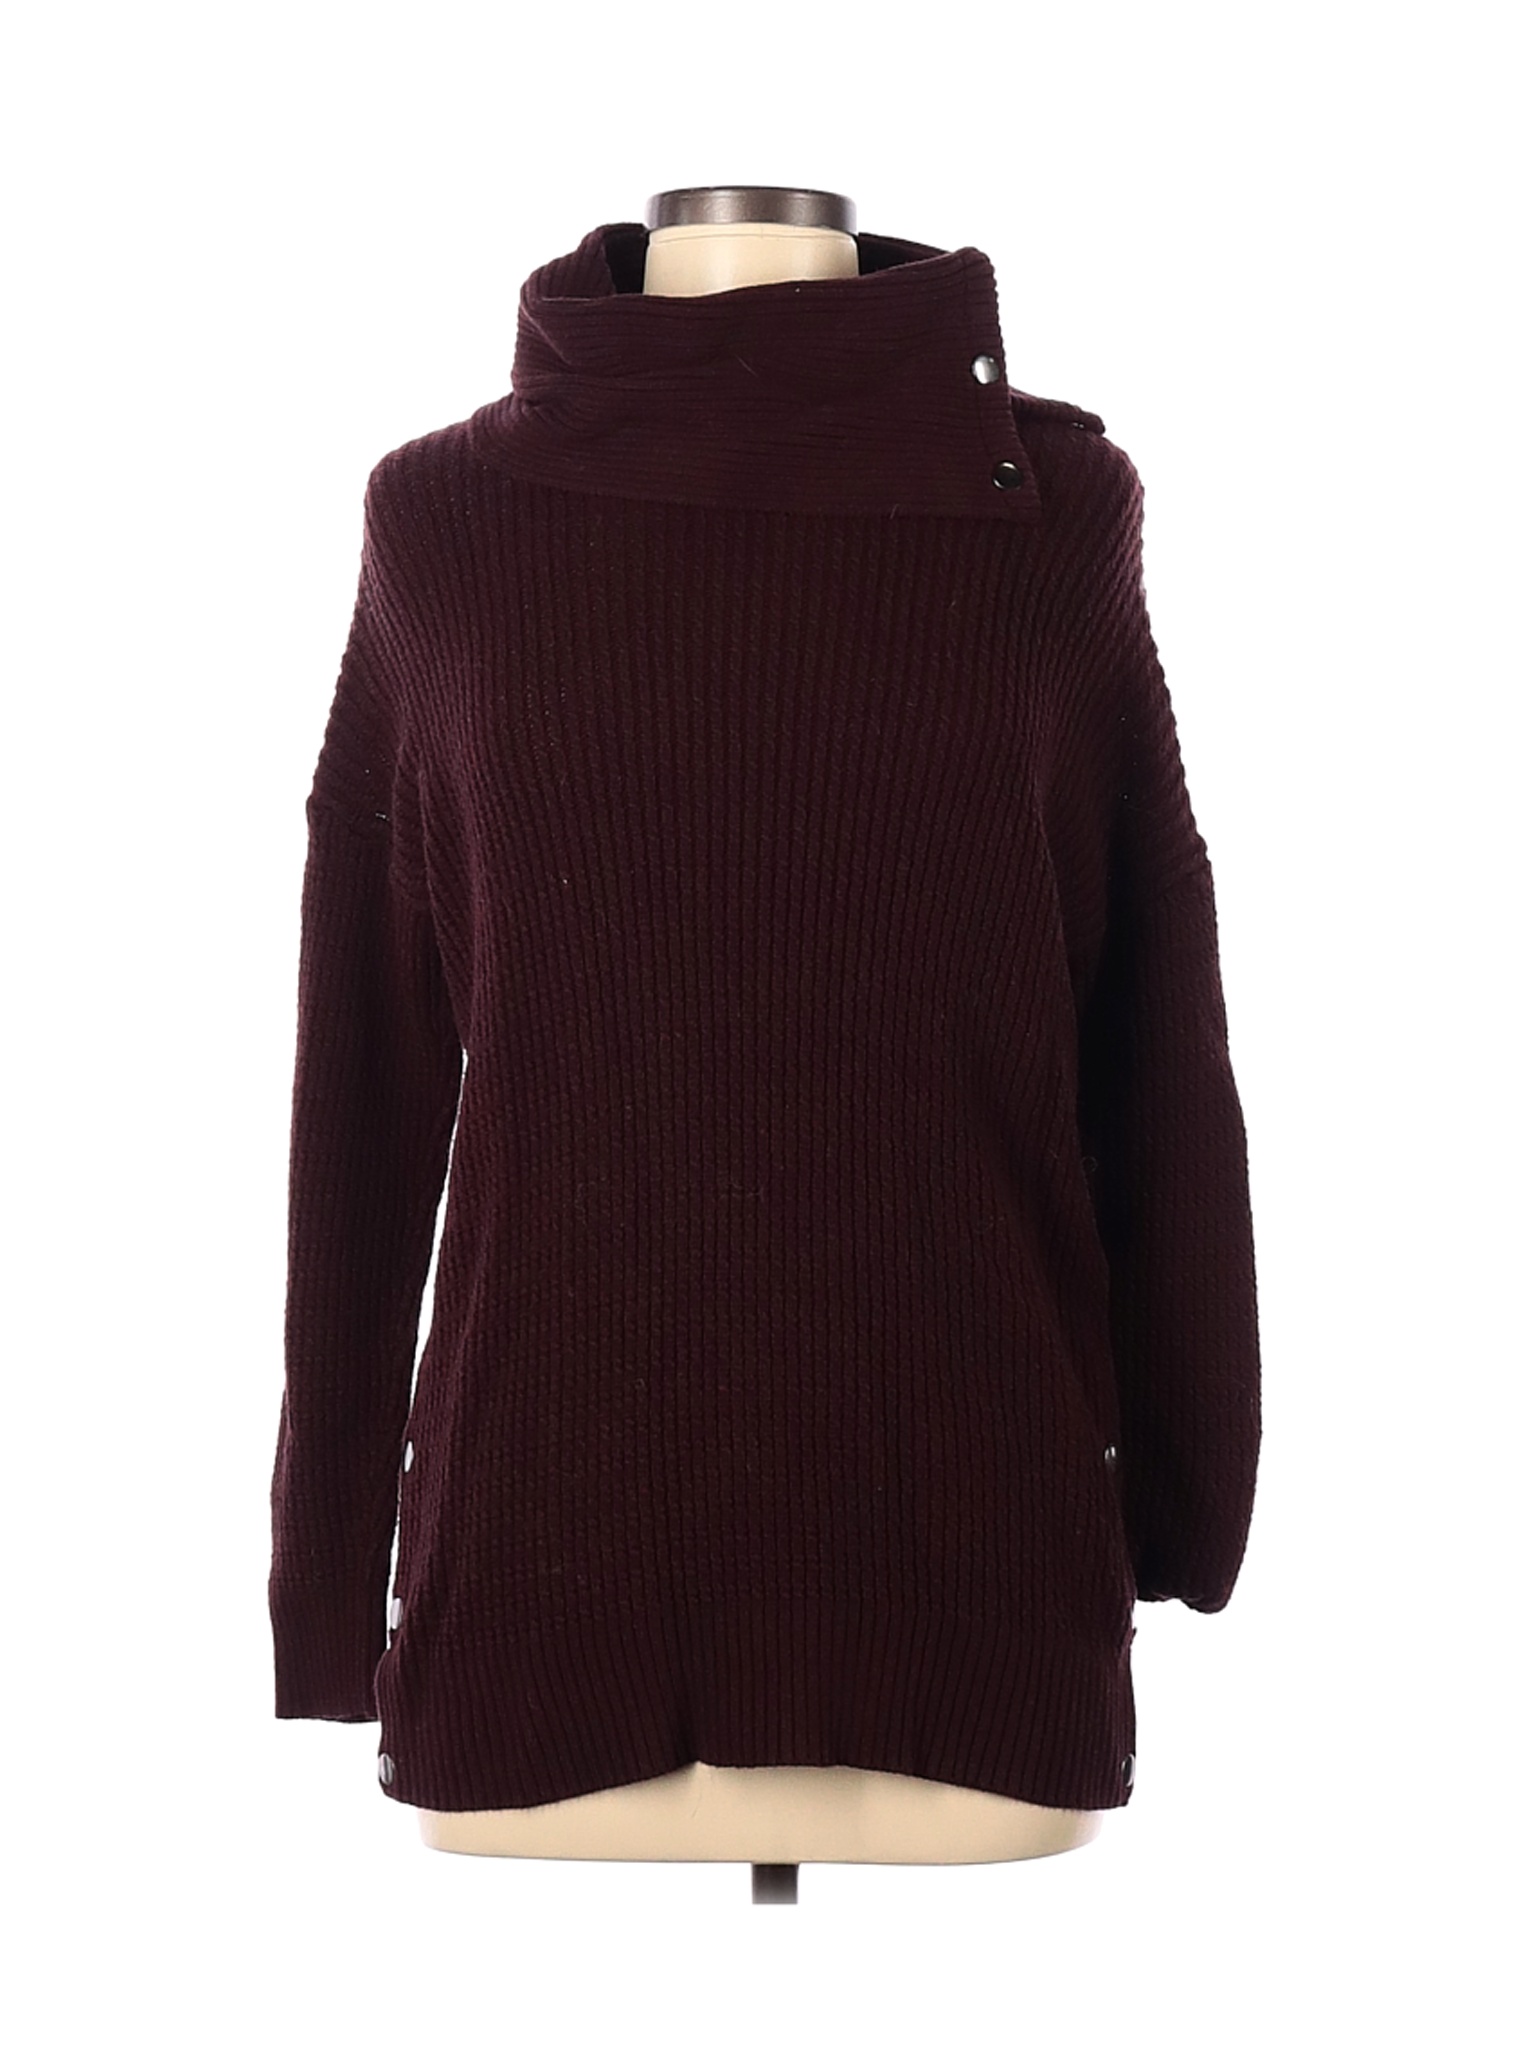 Artisan NY Solid Maroon Burgundy Turtleneck Sweater Size M - 76% off ...